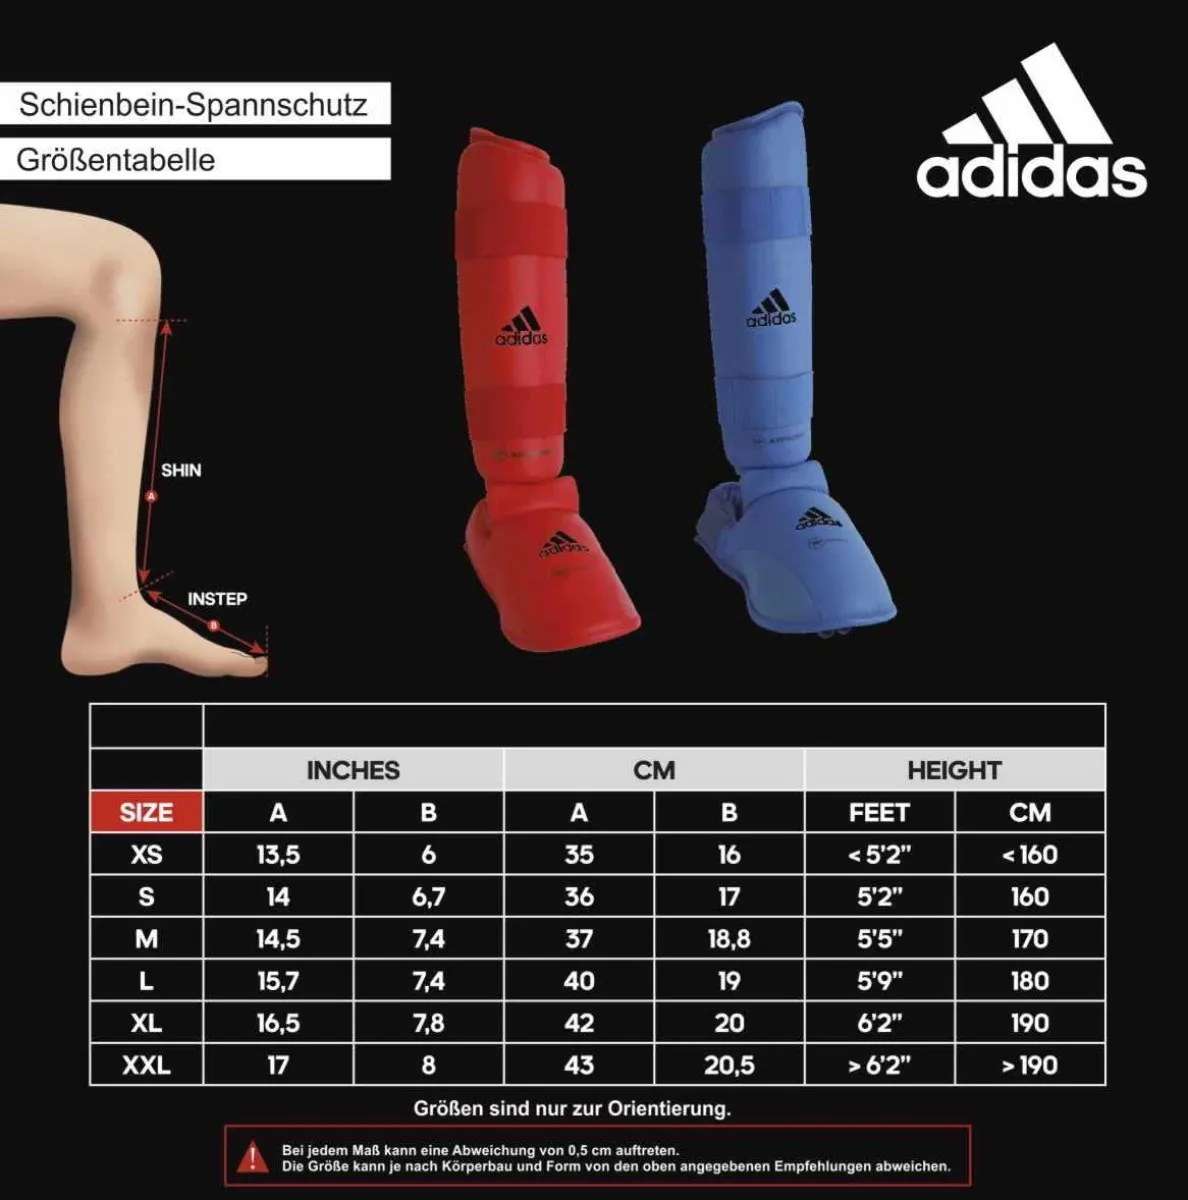 Protège-tibias Adidas Protège-cou-de-pieds WKF approved rouge